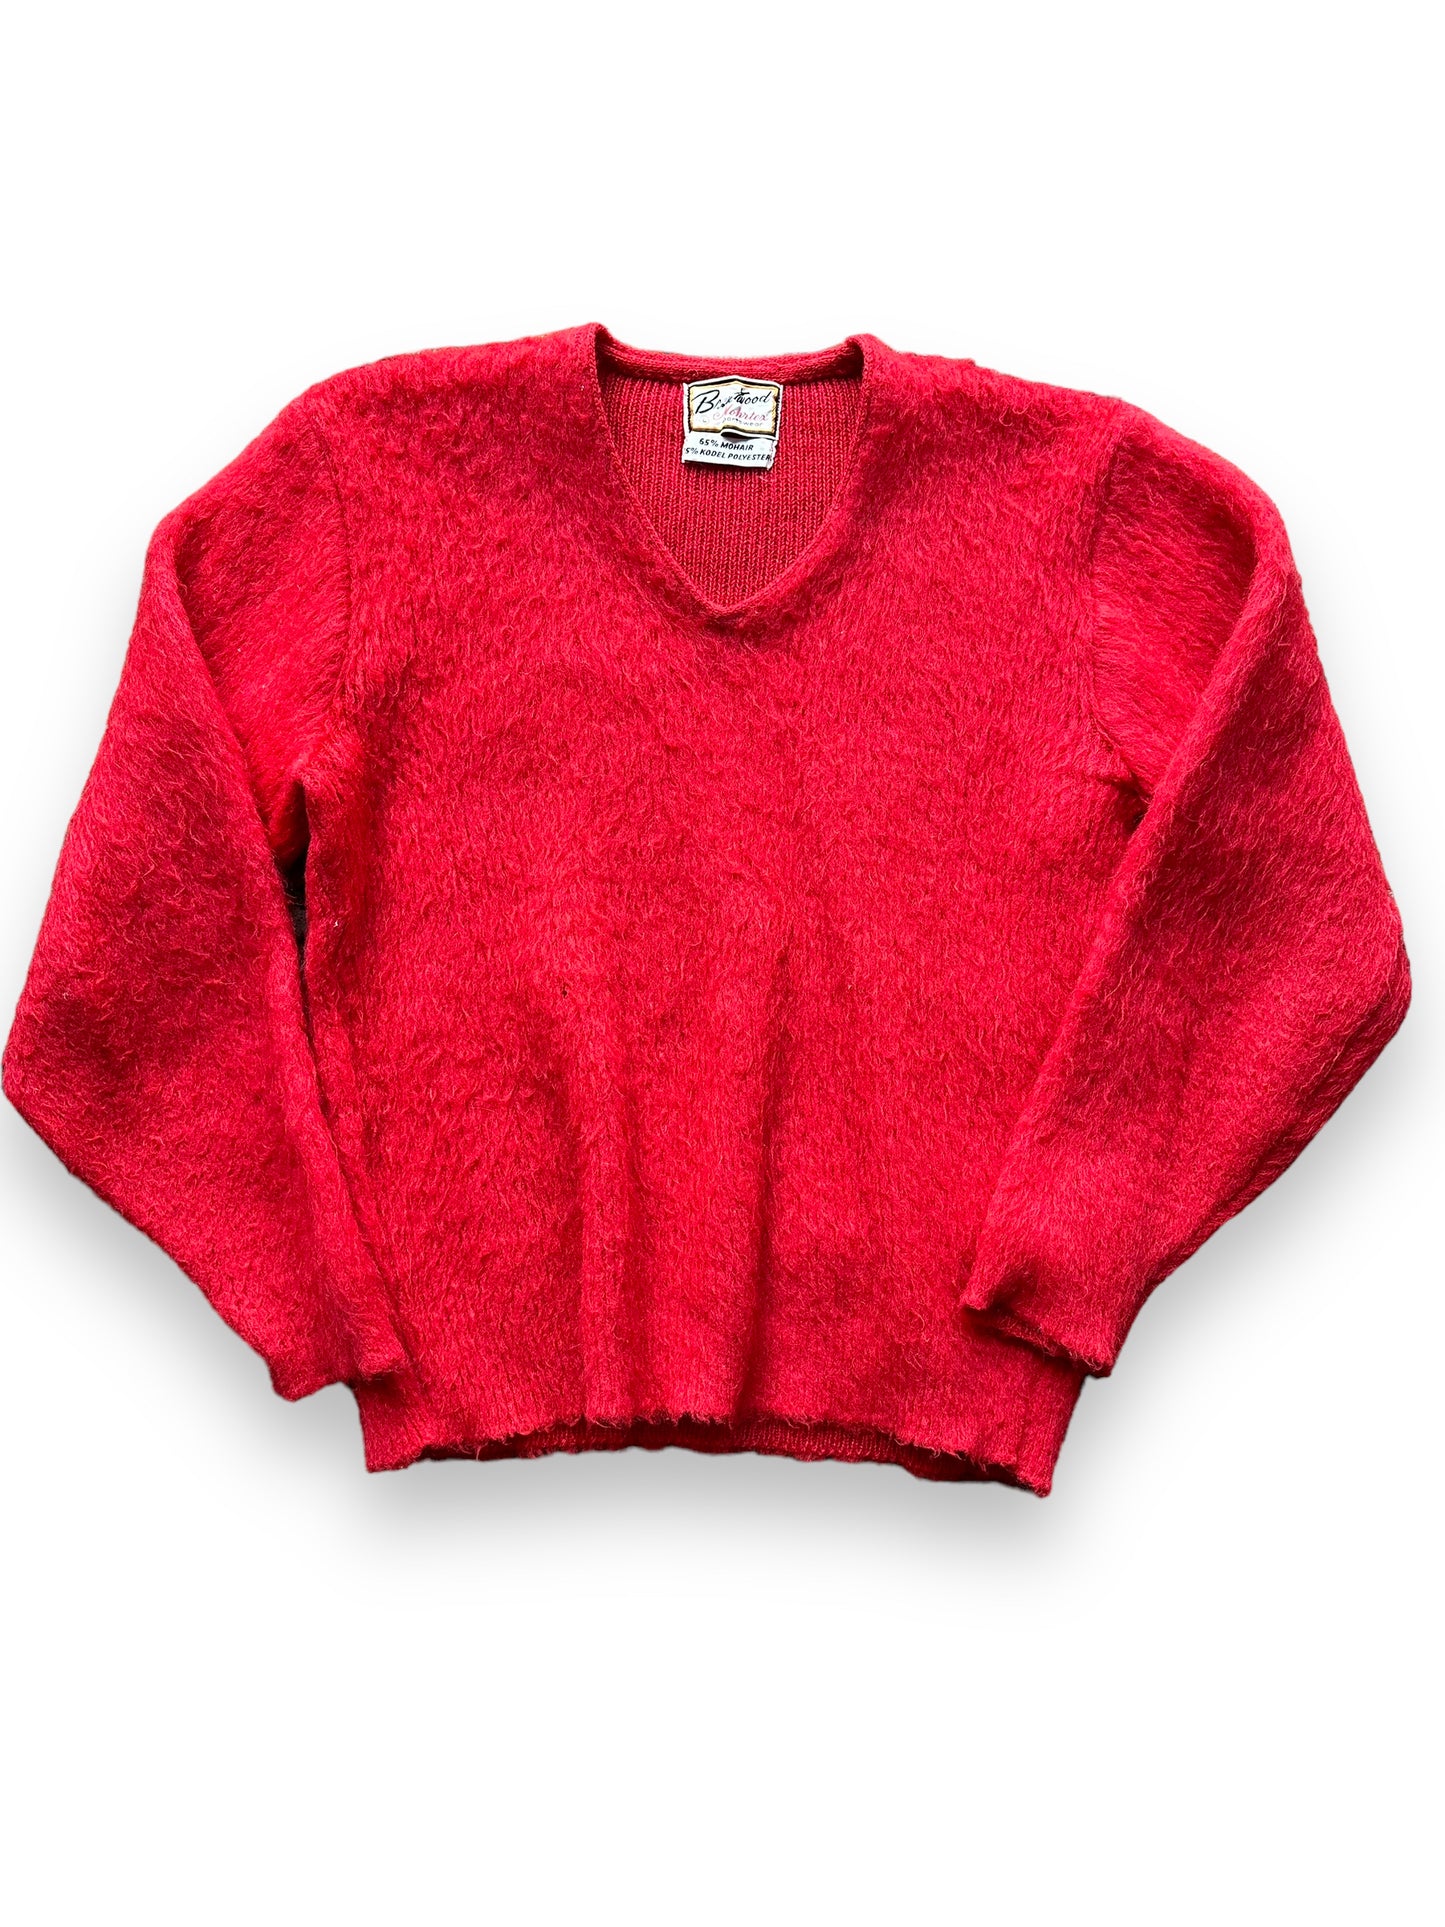 Front View of Vintage Brentwood Red Mohair Sweater SZ L | Vintage Mohair Sweater Seattle | Barn Owl Vintage Goods